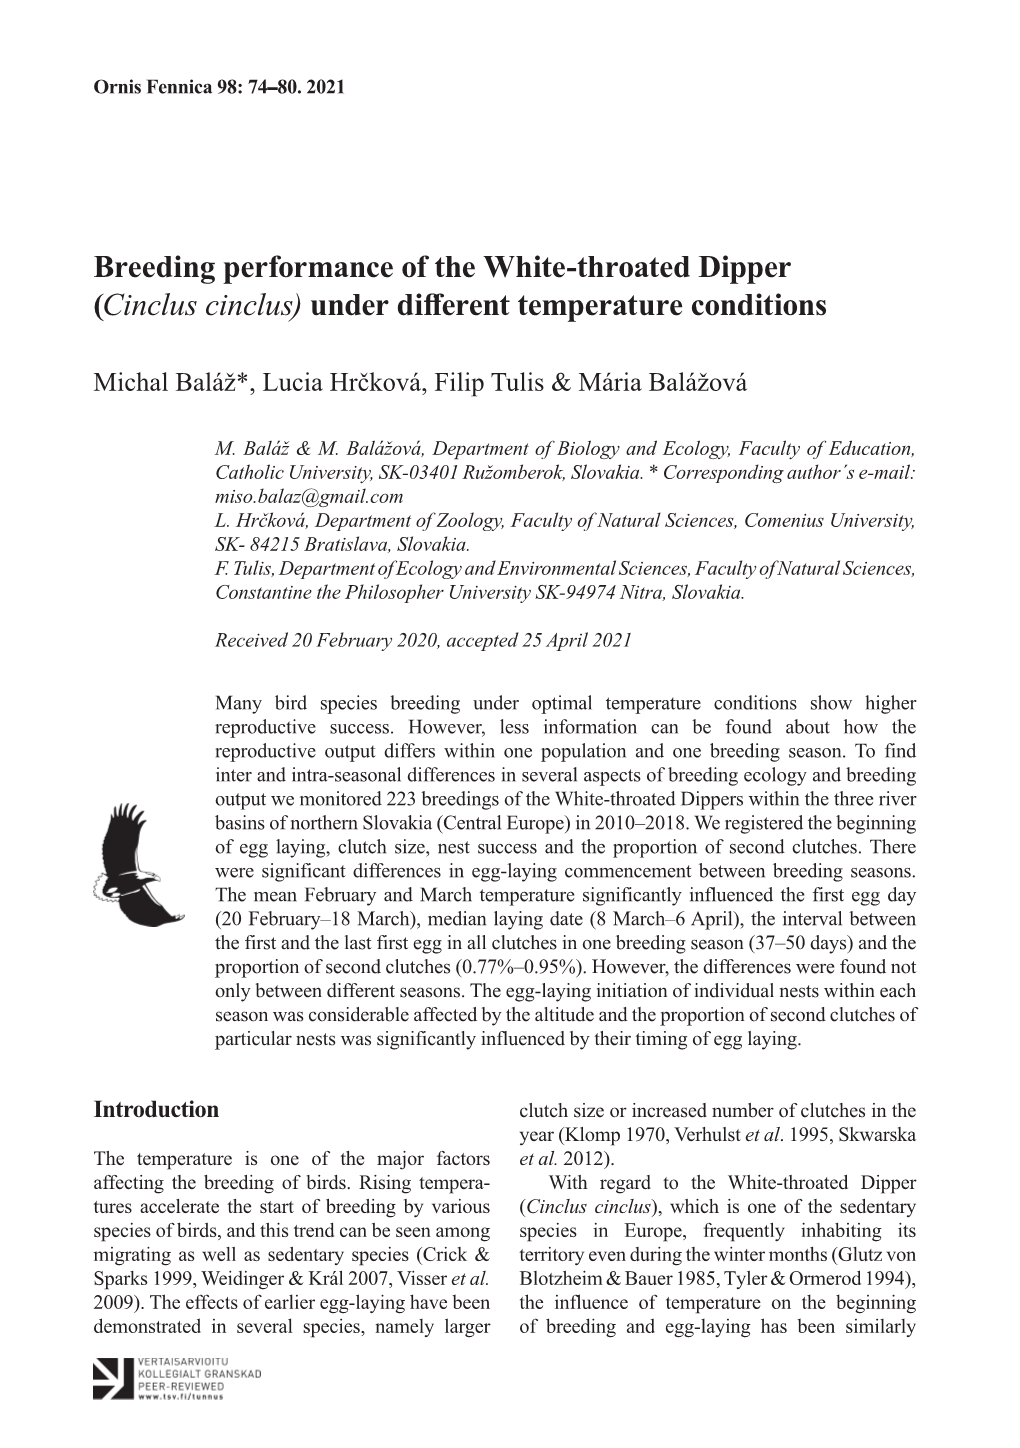 Breeding Performance of the White-Throated Dipper (Cinclus Cinclus) Under Different Temperature Conditions